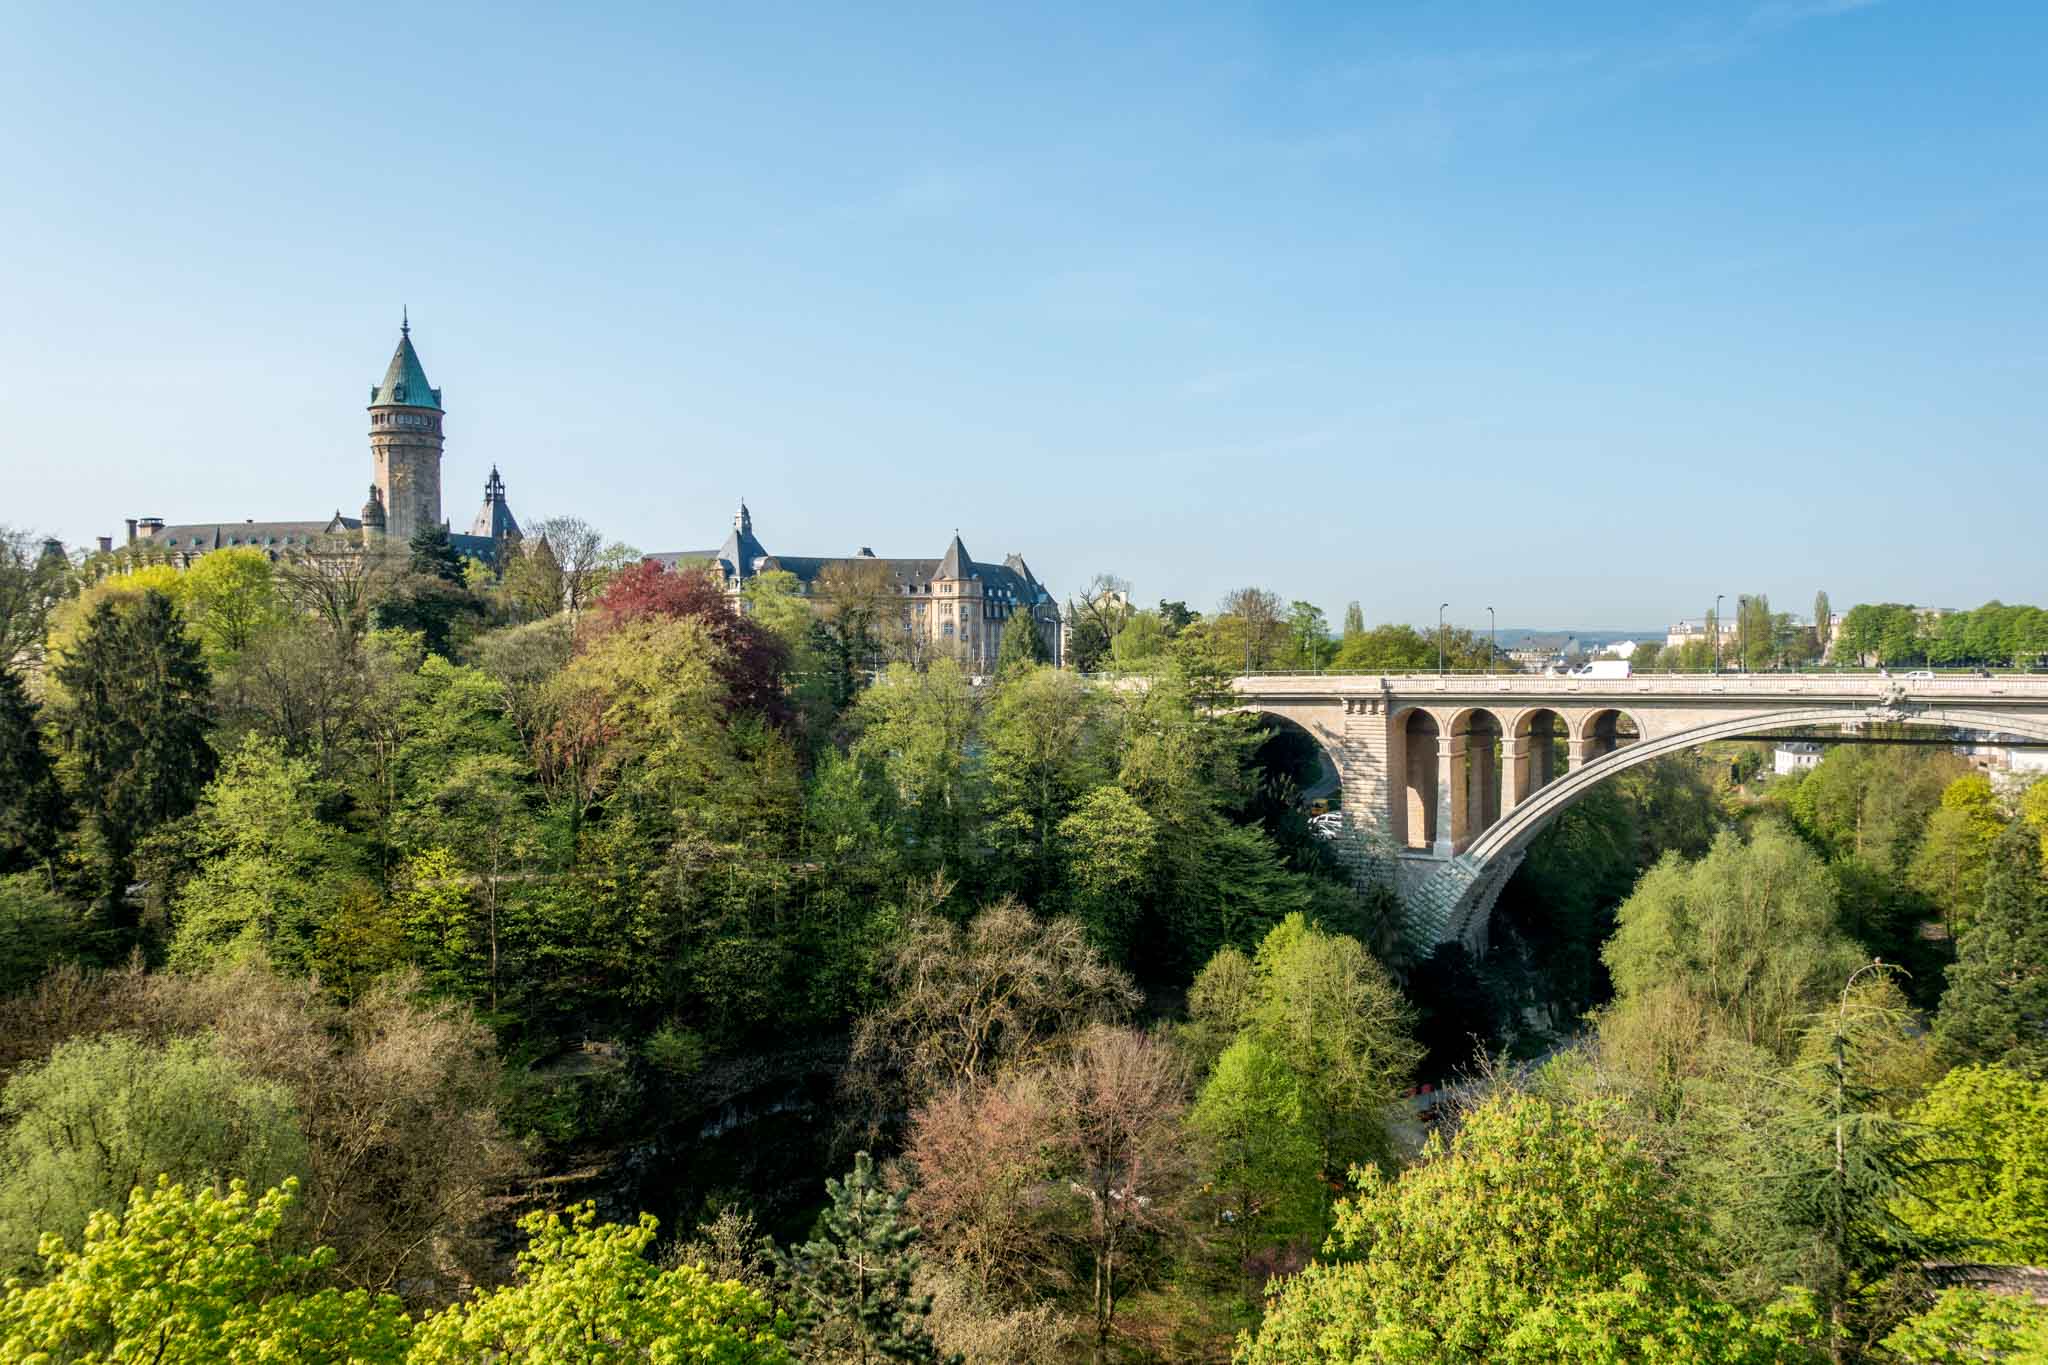 View of bridge and building across a tree-filled valley in Luxembourg City, Luxembourg.